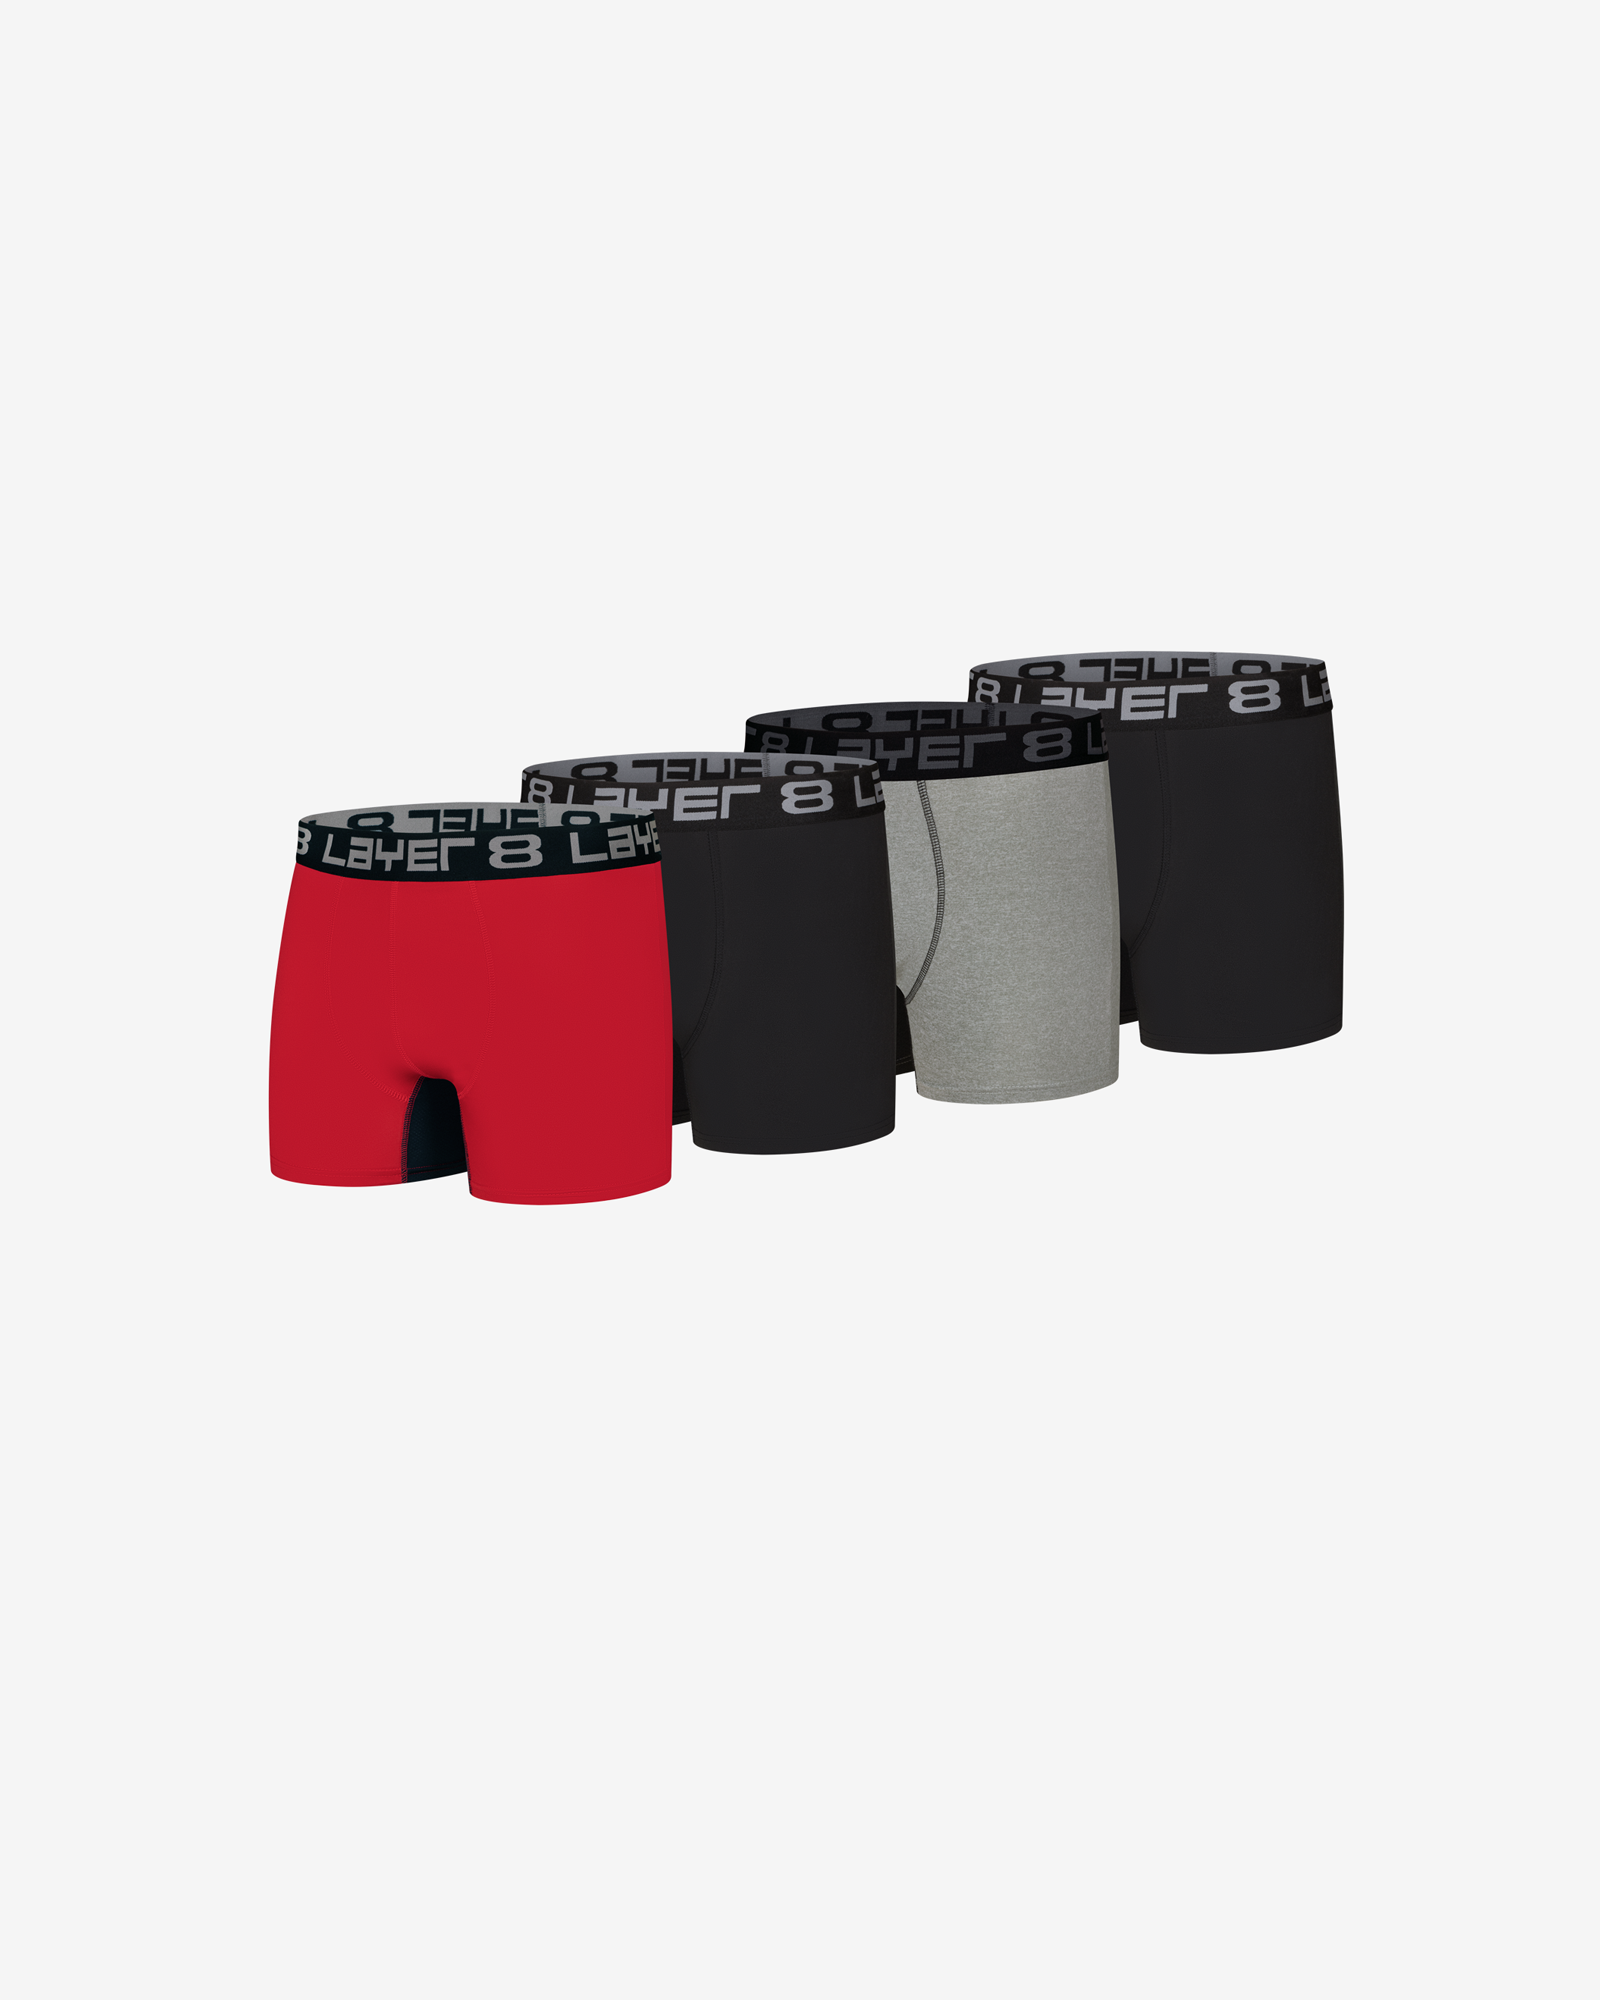 Up To 63% Off on Layer 8 Men's Briefs (3-Pack)